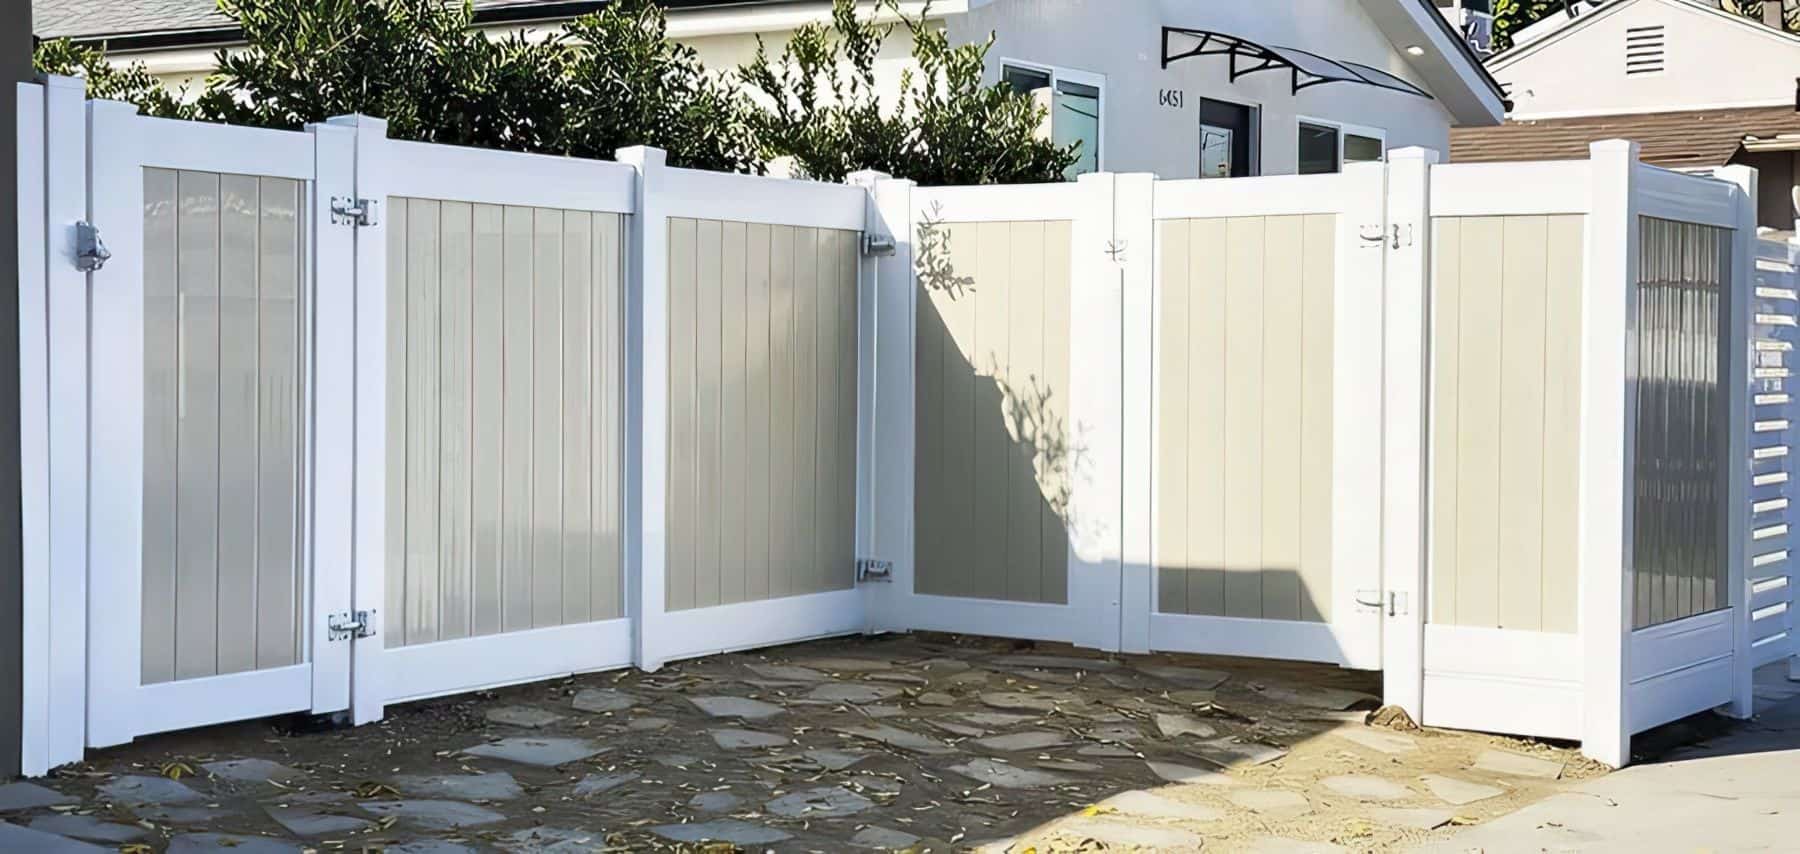 Vinyl privacy two-tone fence with multiple gates leading into modern suburban house from a well designed stone walkway.